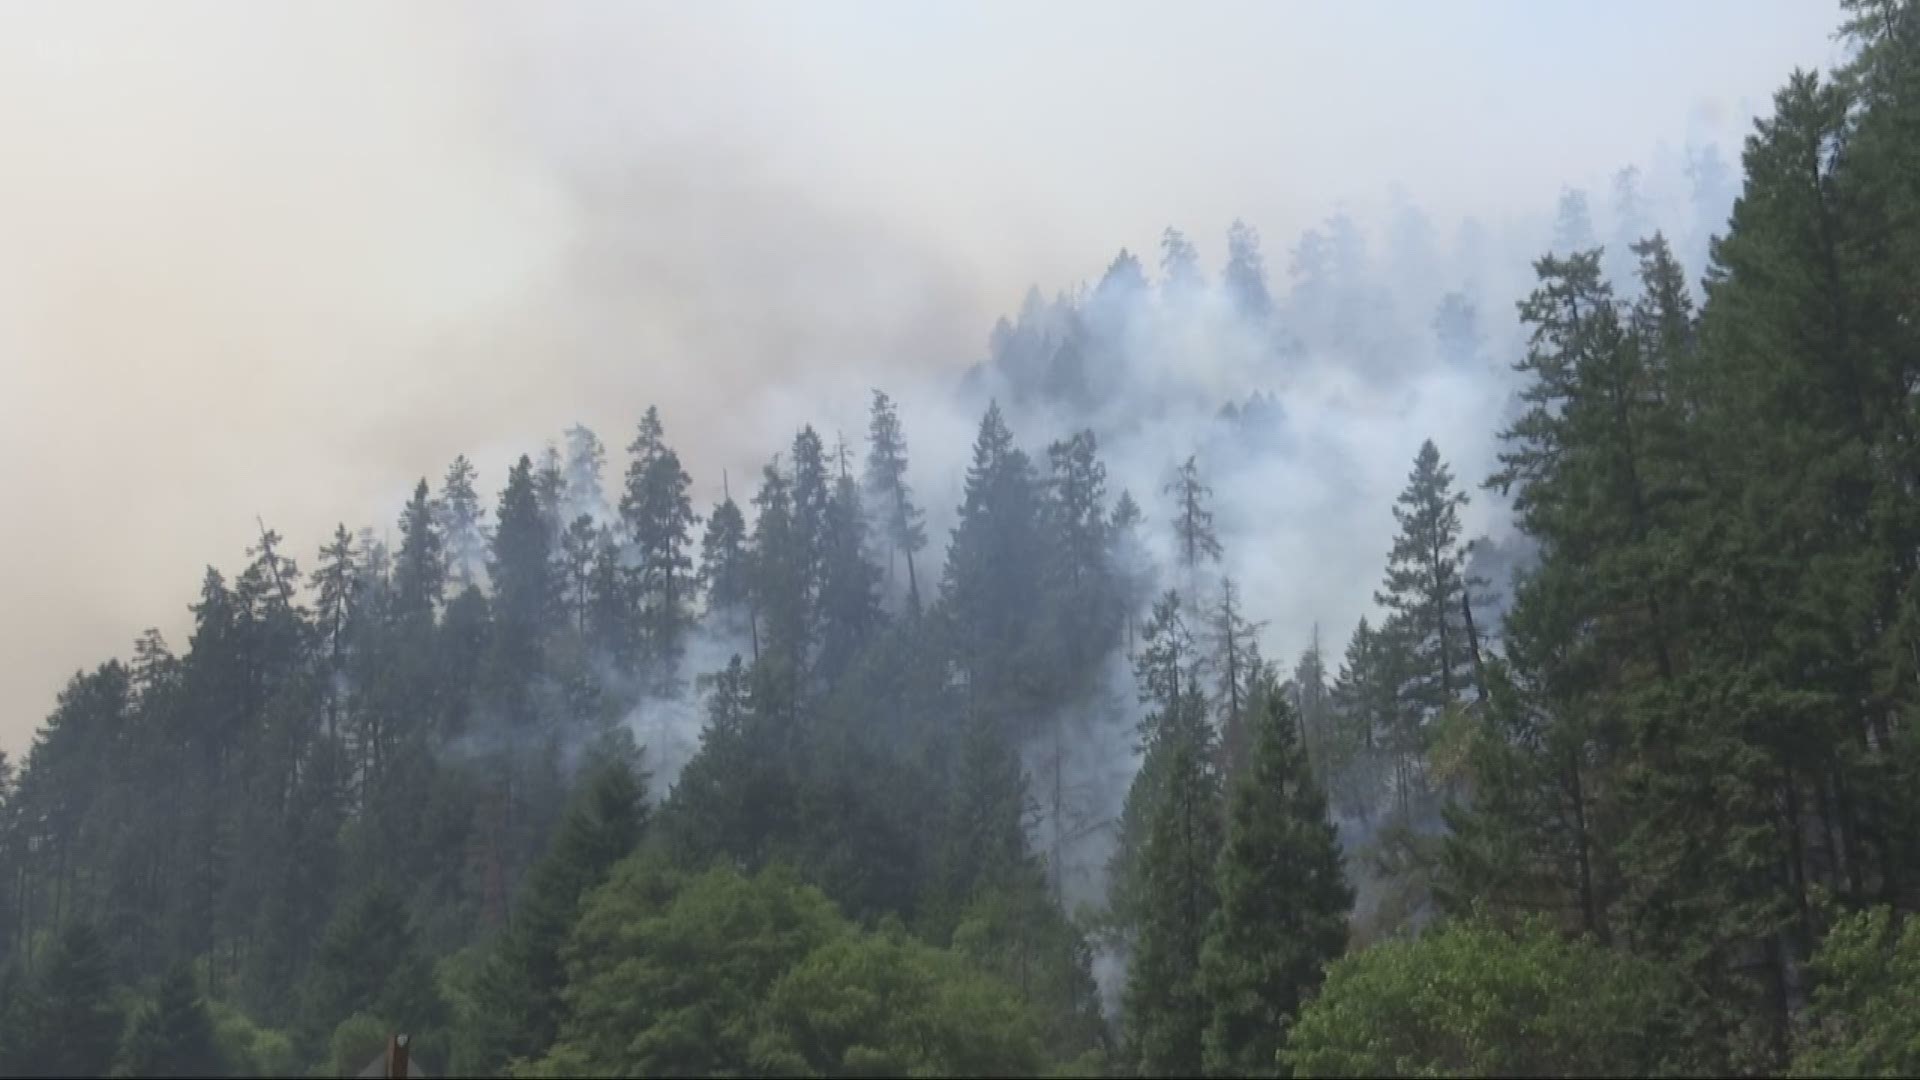 The Milepost 97 Fire in Southern Oregon has grown to nearly 9,000 acres. A small grass fire disrupted traffic in Salem on Saturday.